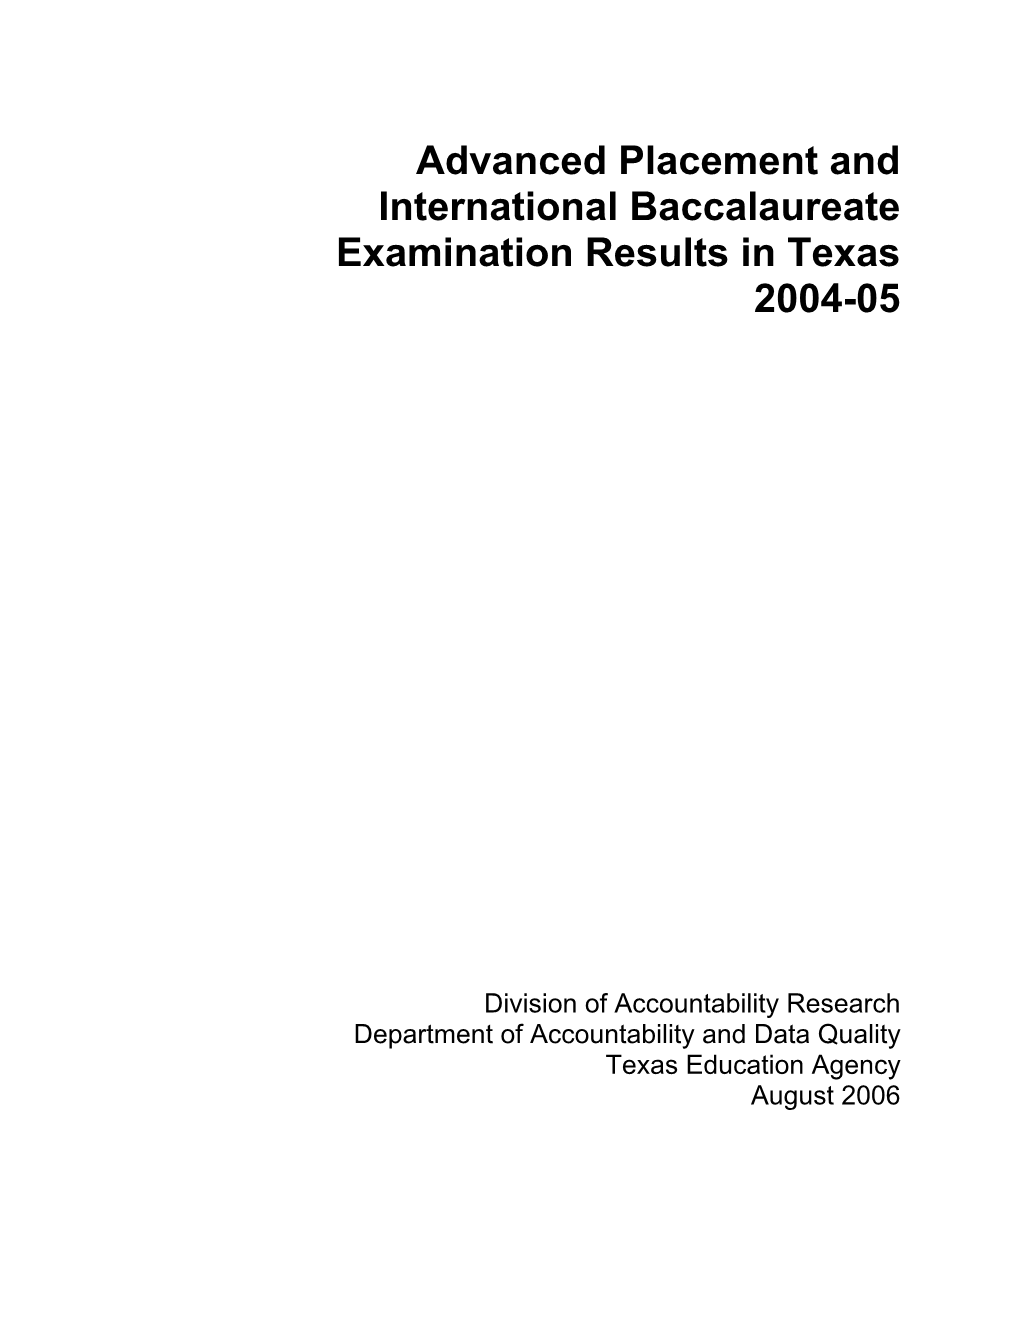 Advanced Placement and International Baccalaureate Examination Results in Texas 2004-05